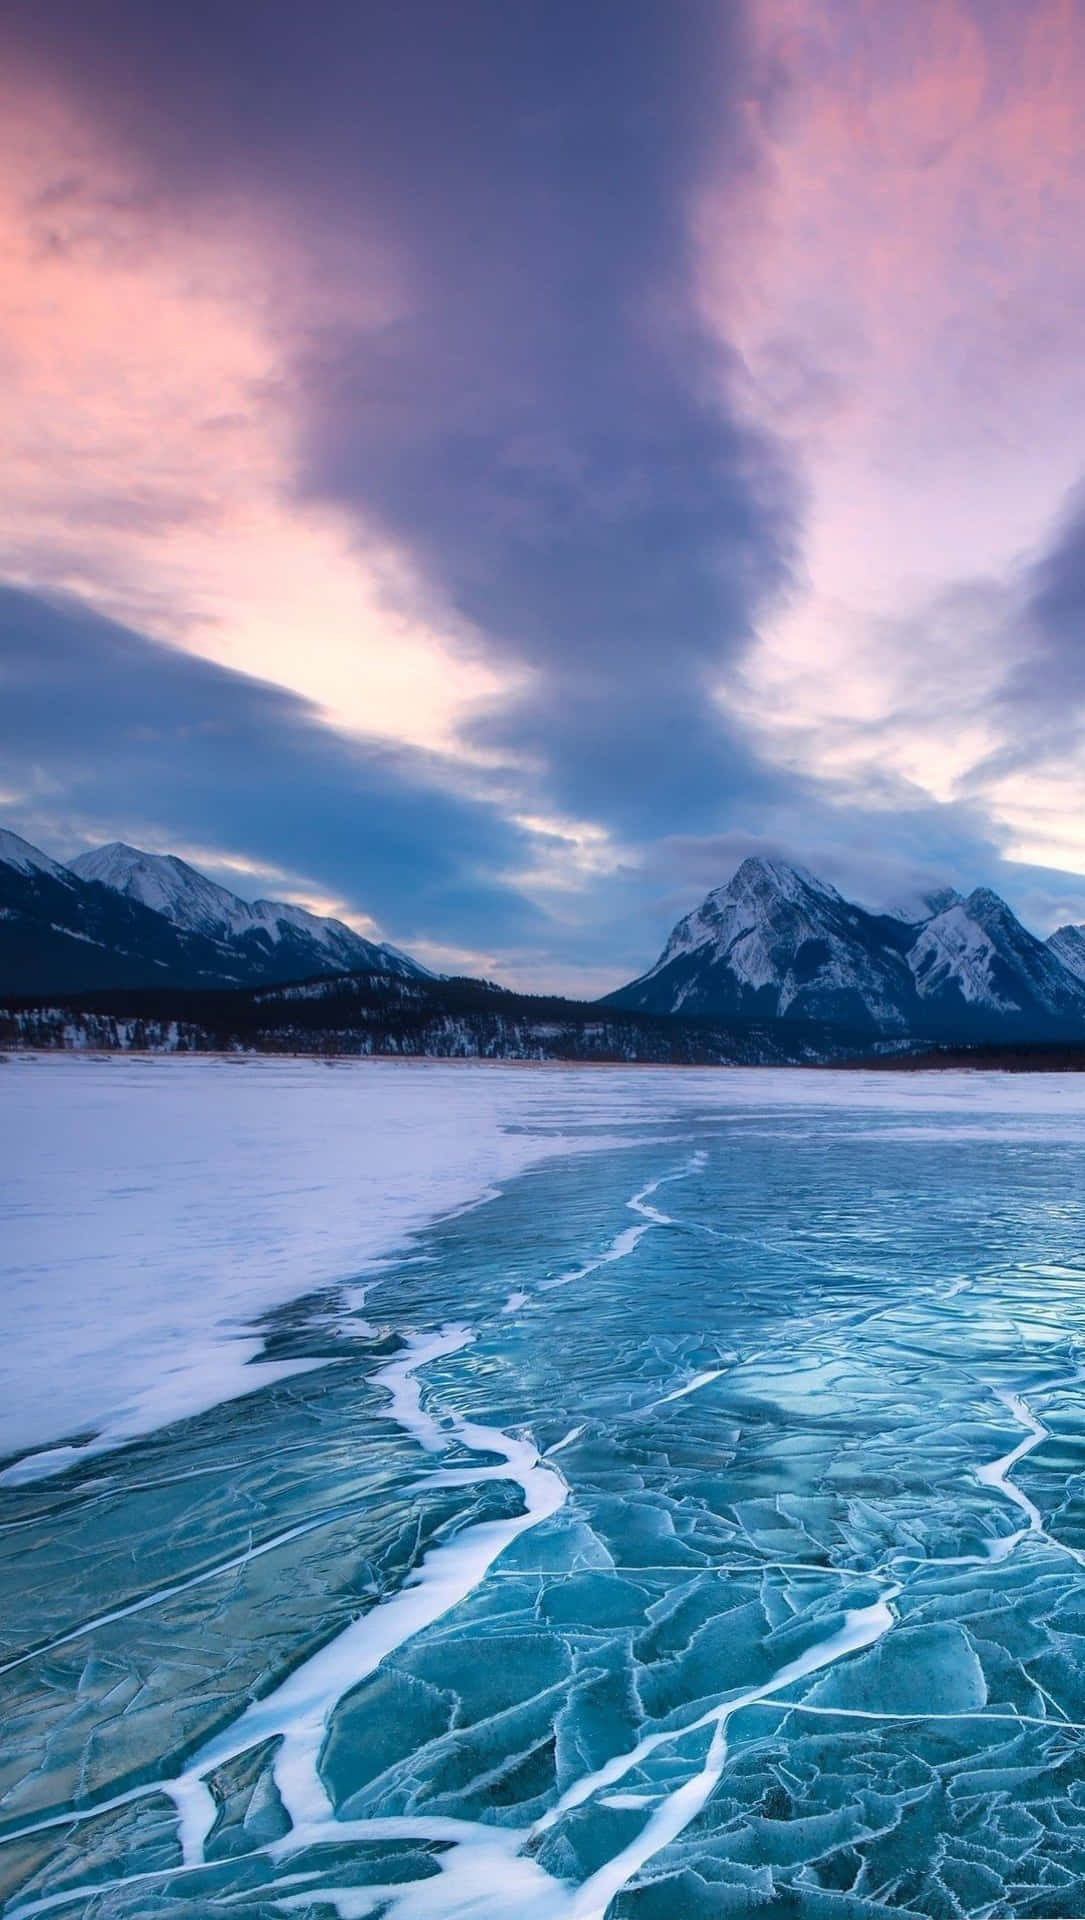 A Frozen Lake With Mountains In The Background